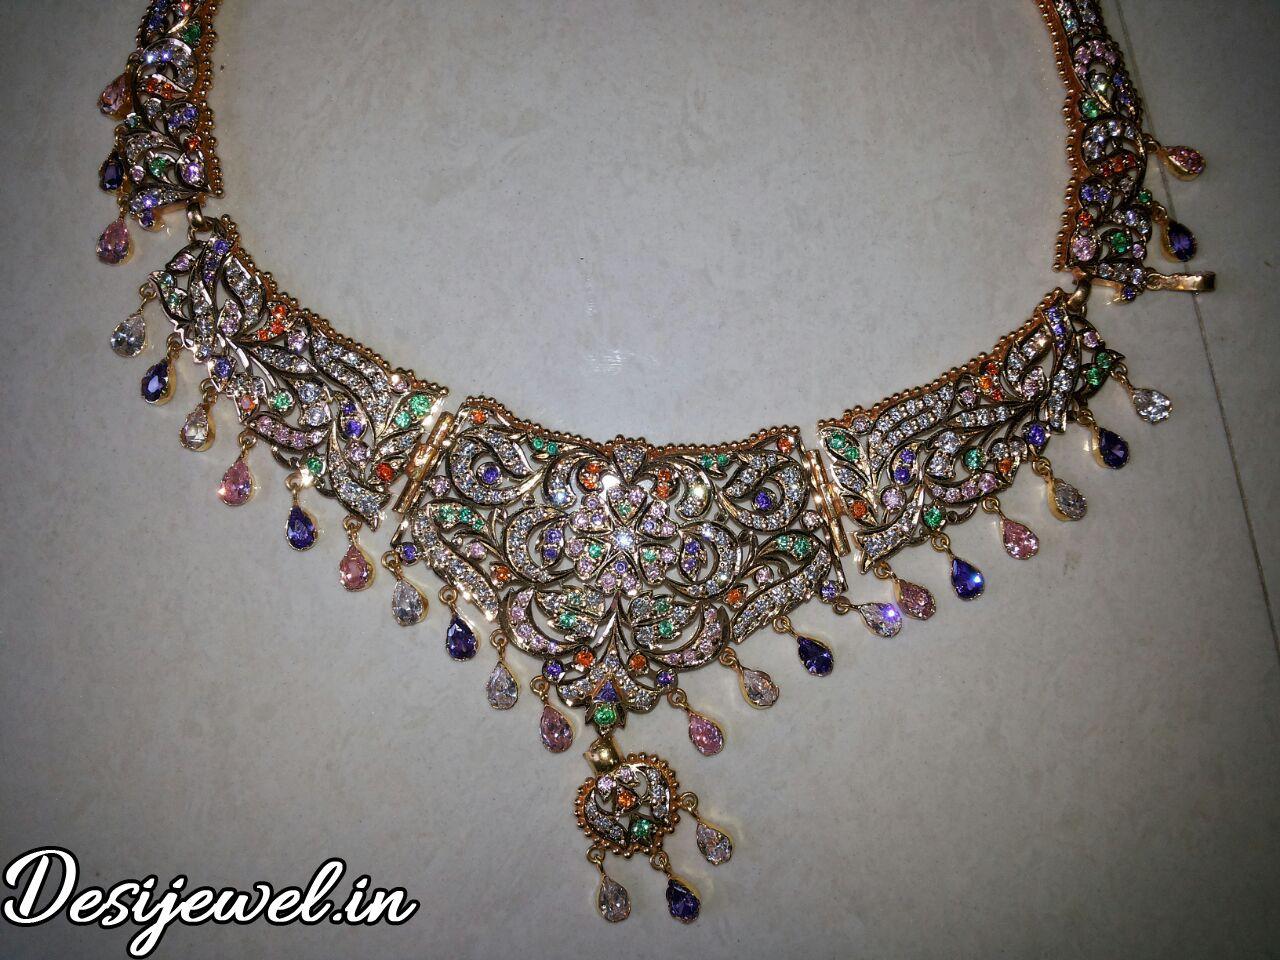 New and Latest Design of Rajasthani Desi gold Necklace 